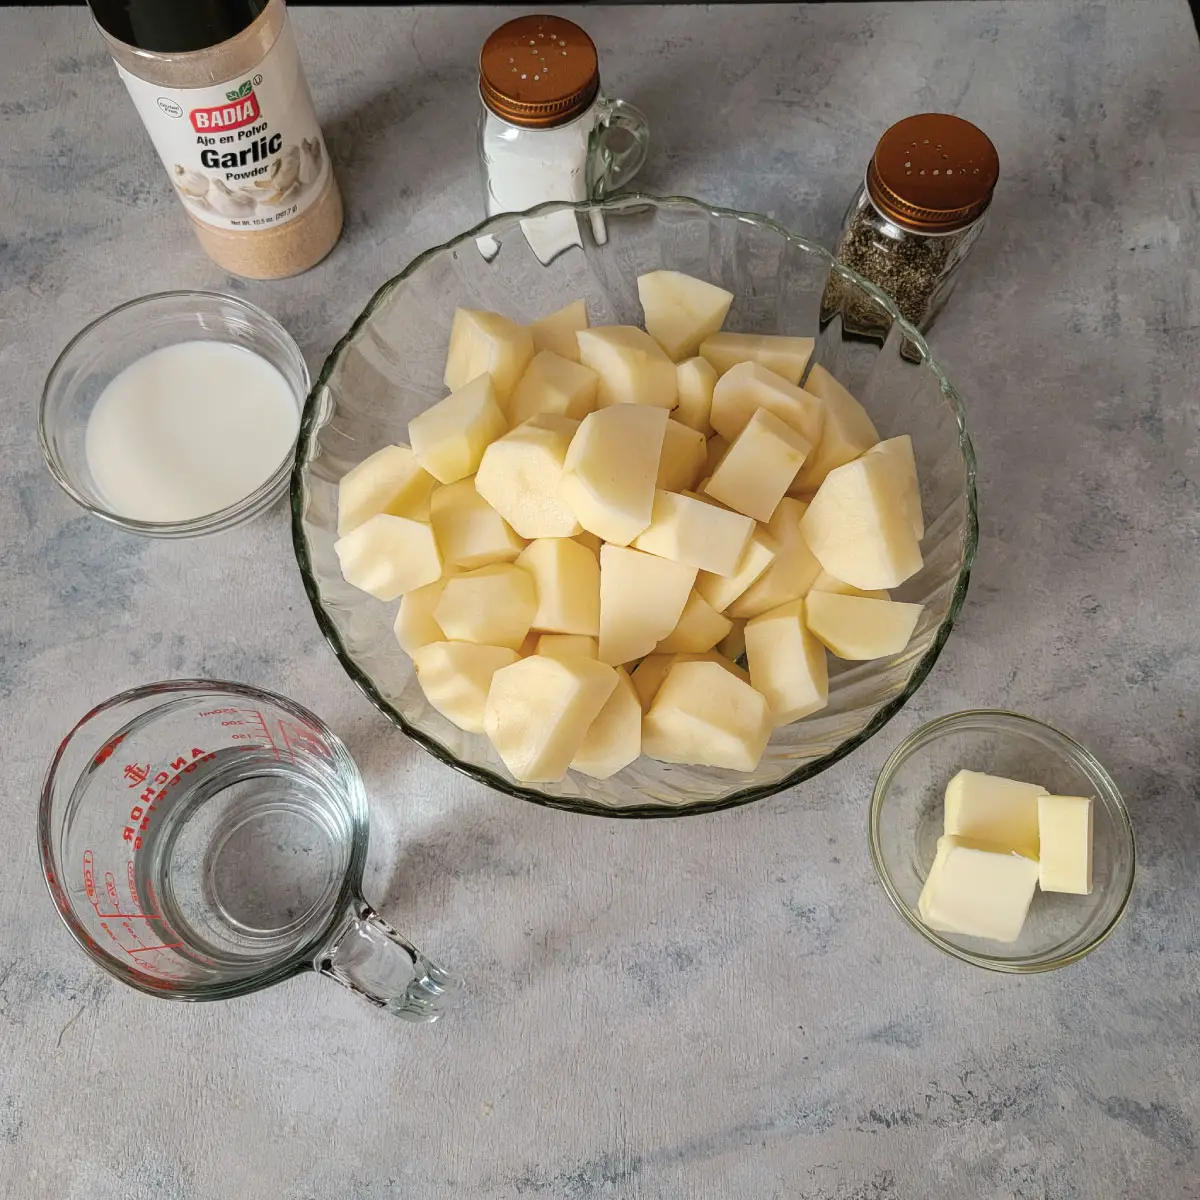 Ingredients for mashed potatoes - potatoes, butter, milk, water, salt, pepper and garlic.